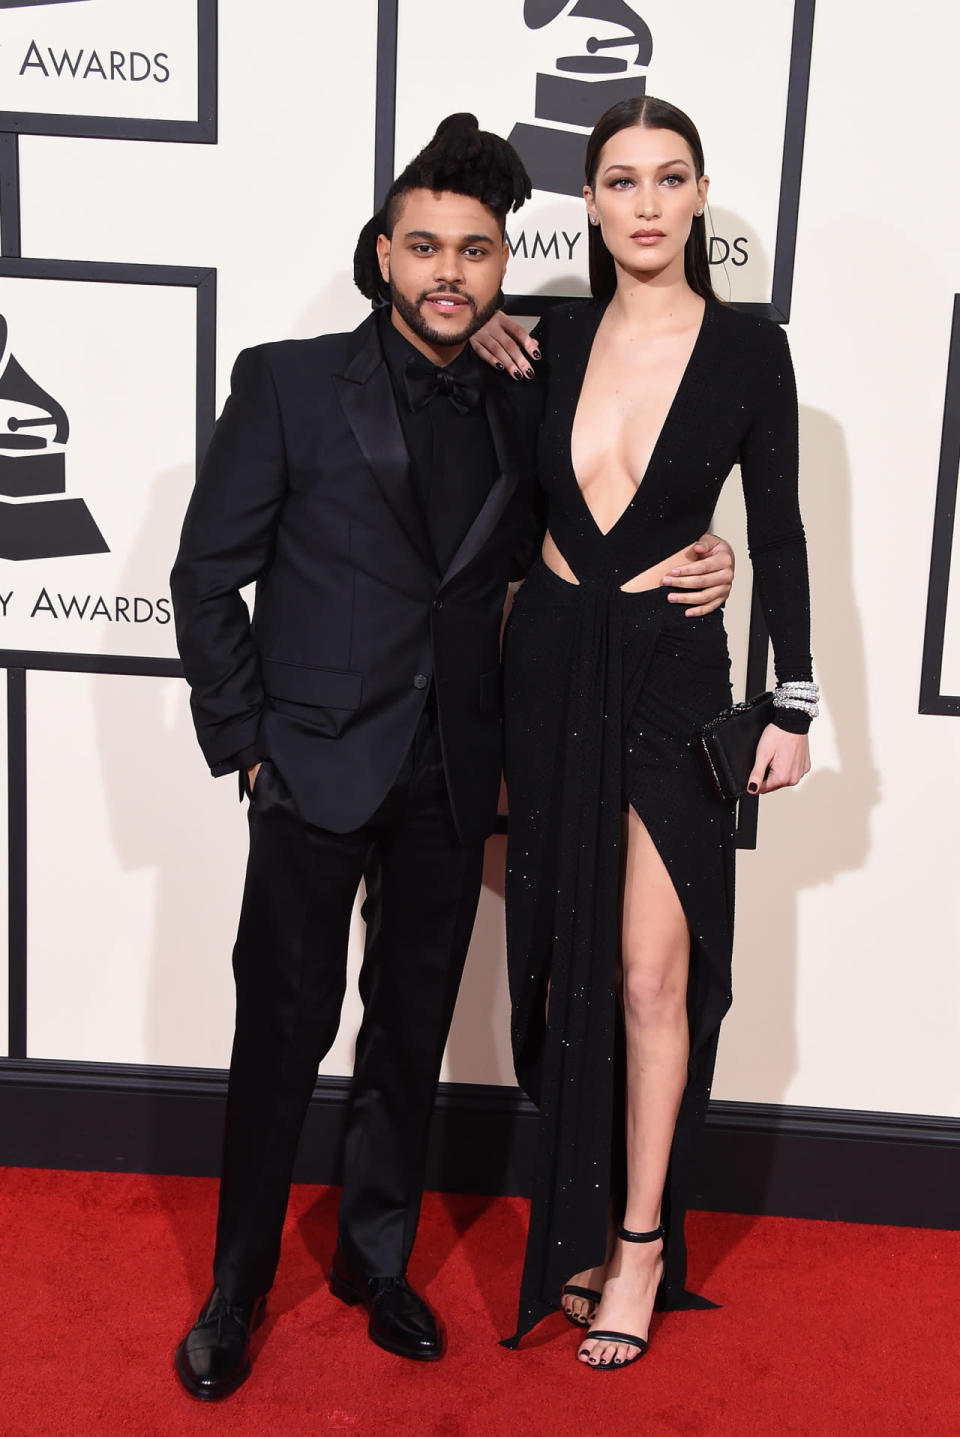 Best: The Weeknd and Bella Hadid at the 58th Grammy Awards at Staples Center in Los Angeles, California, on February 15, 2016.